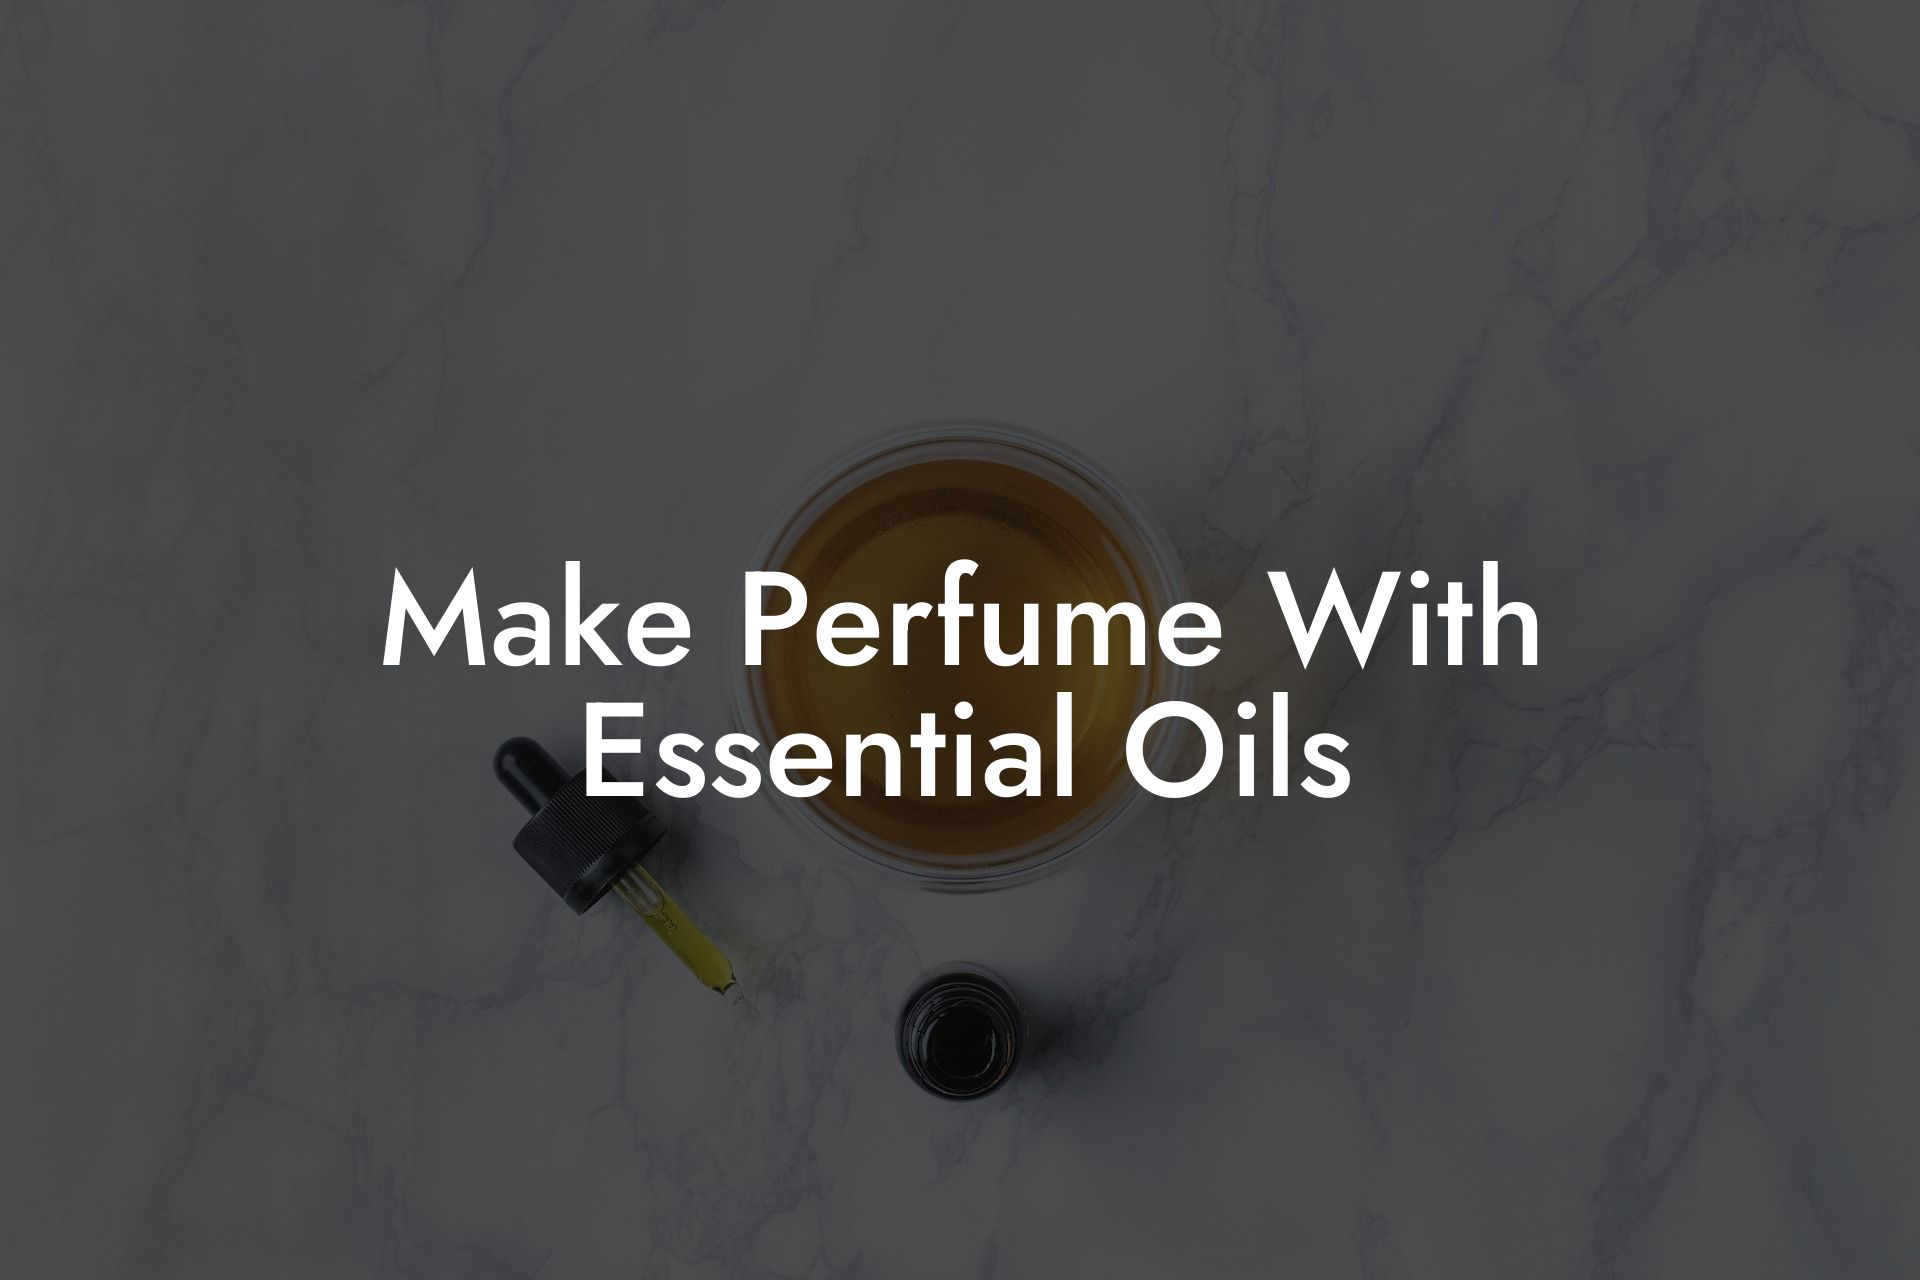 Make Perfume With Essential Oils